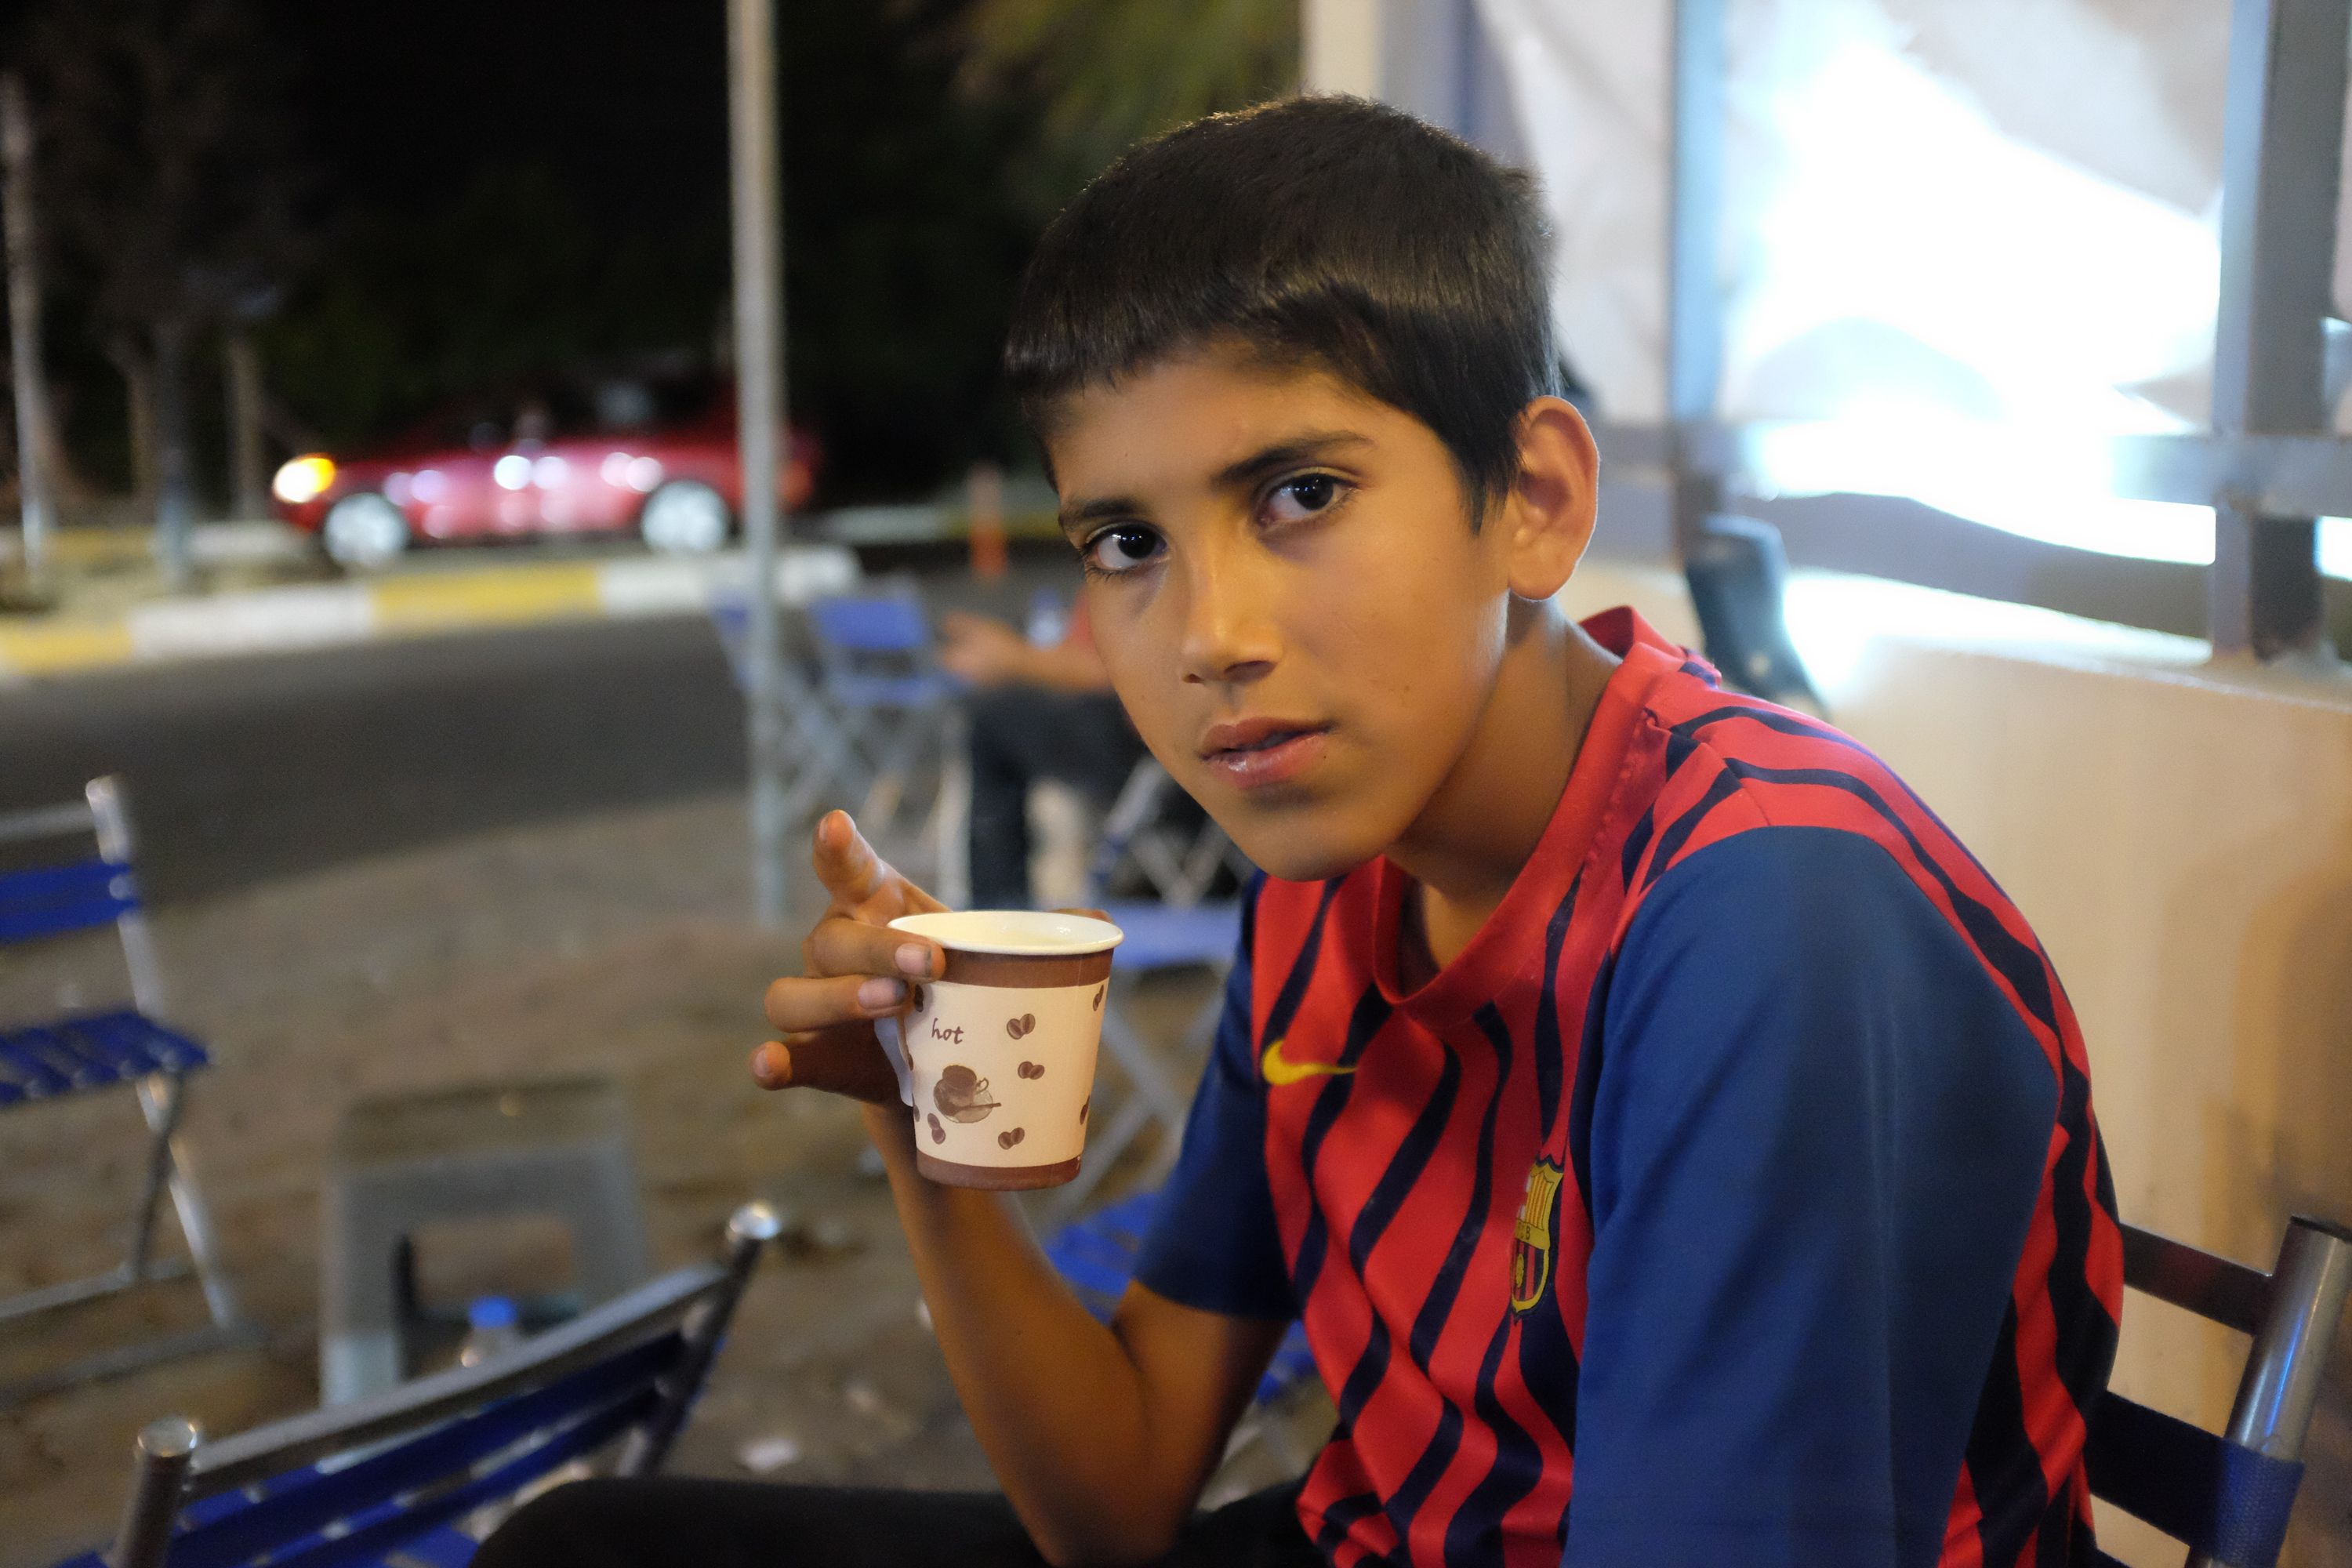 A young boy in an FC Barcelona shirt holds a paper cup of tea, sitting on a chair by the side of a road.